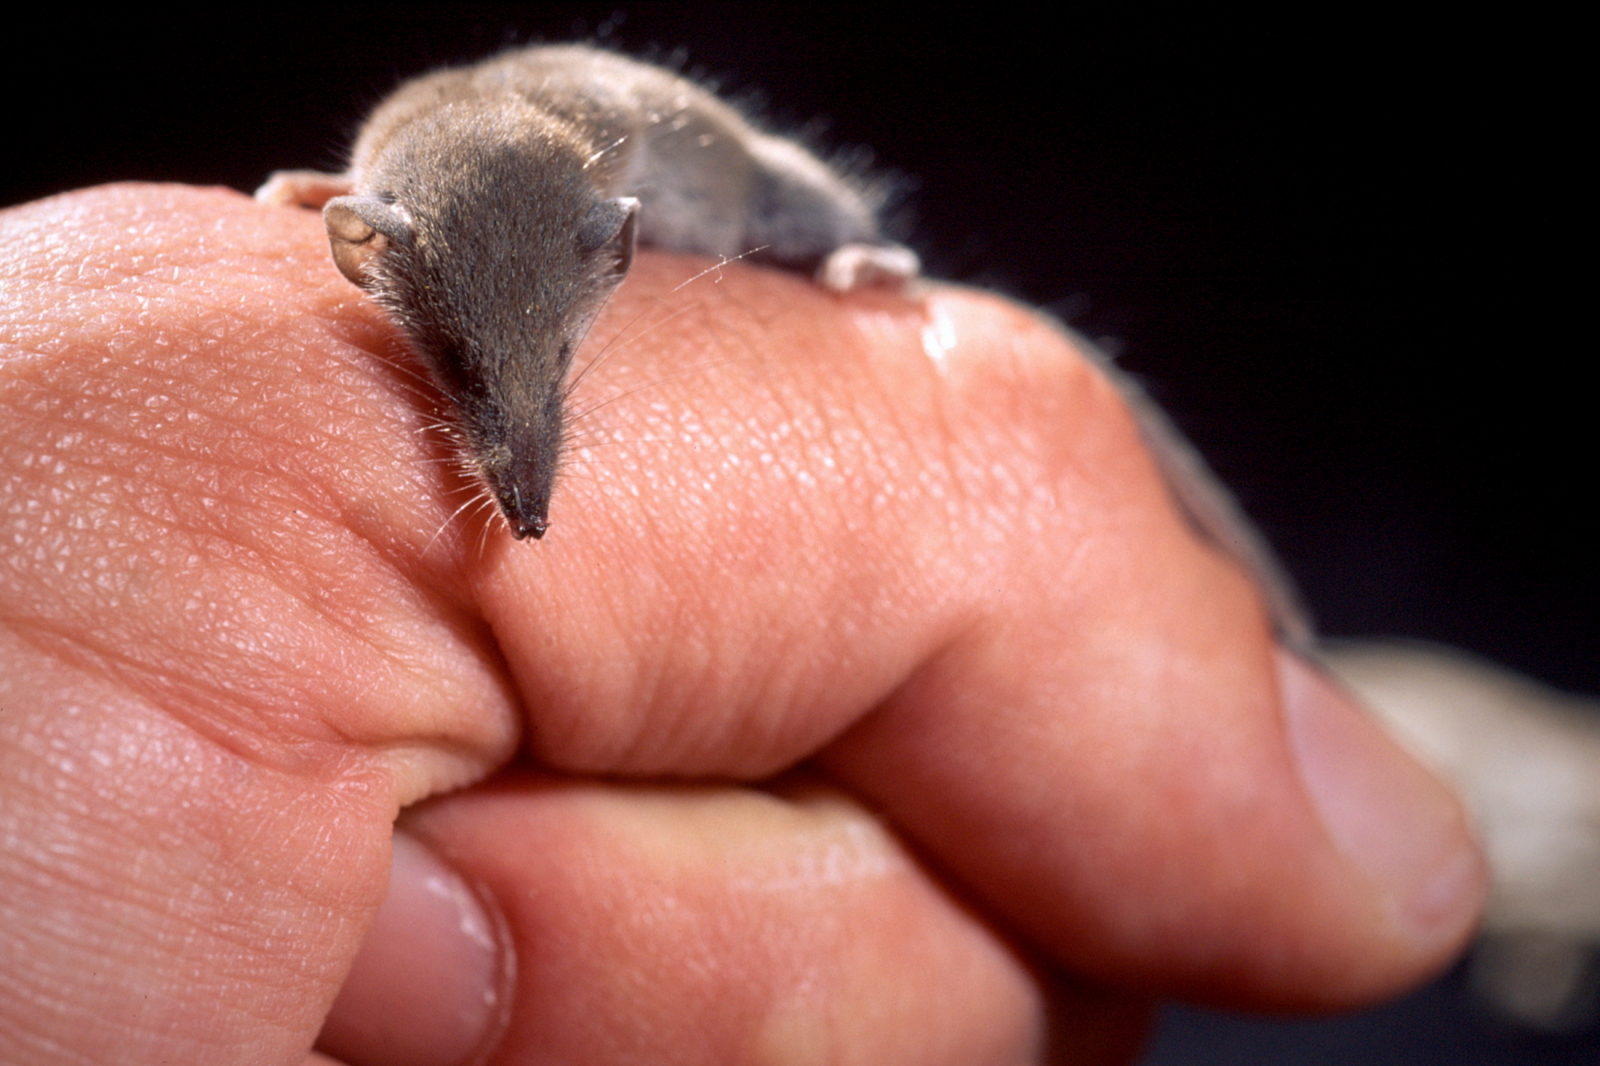 Why is the Etruscan shrew the smallest mammal?